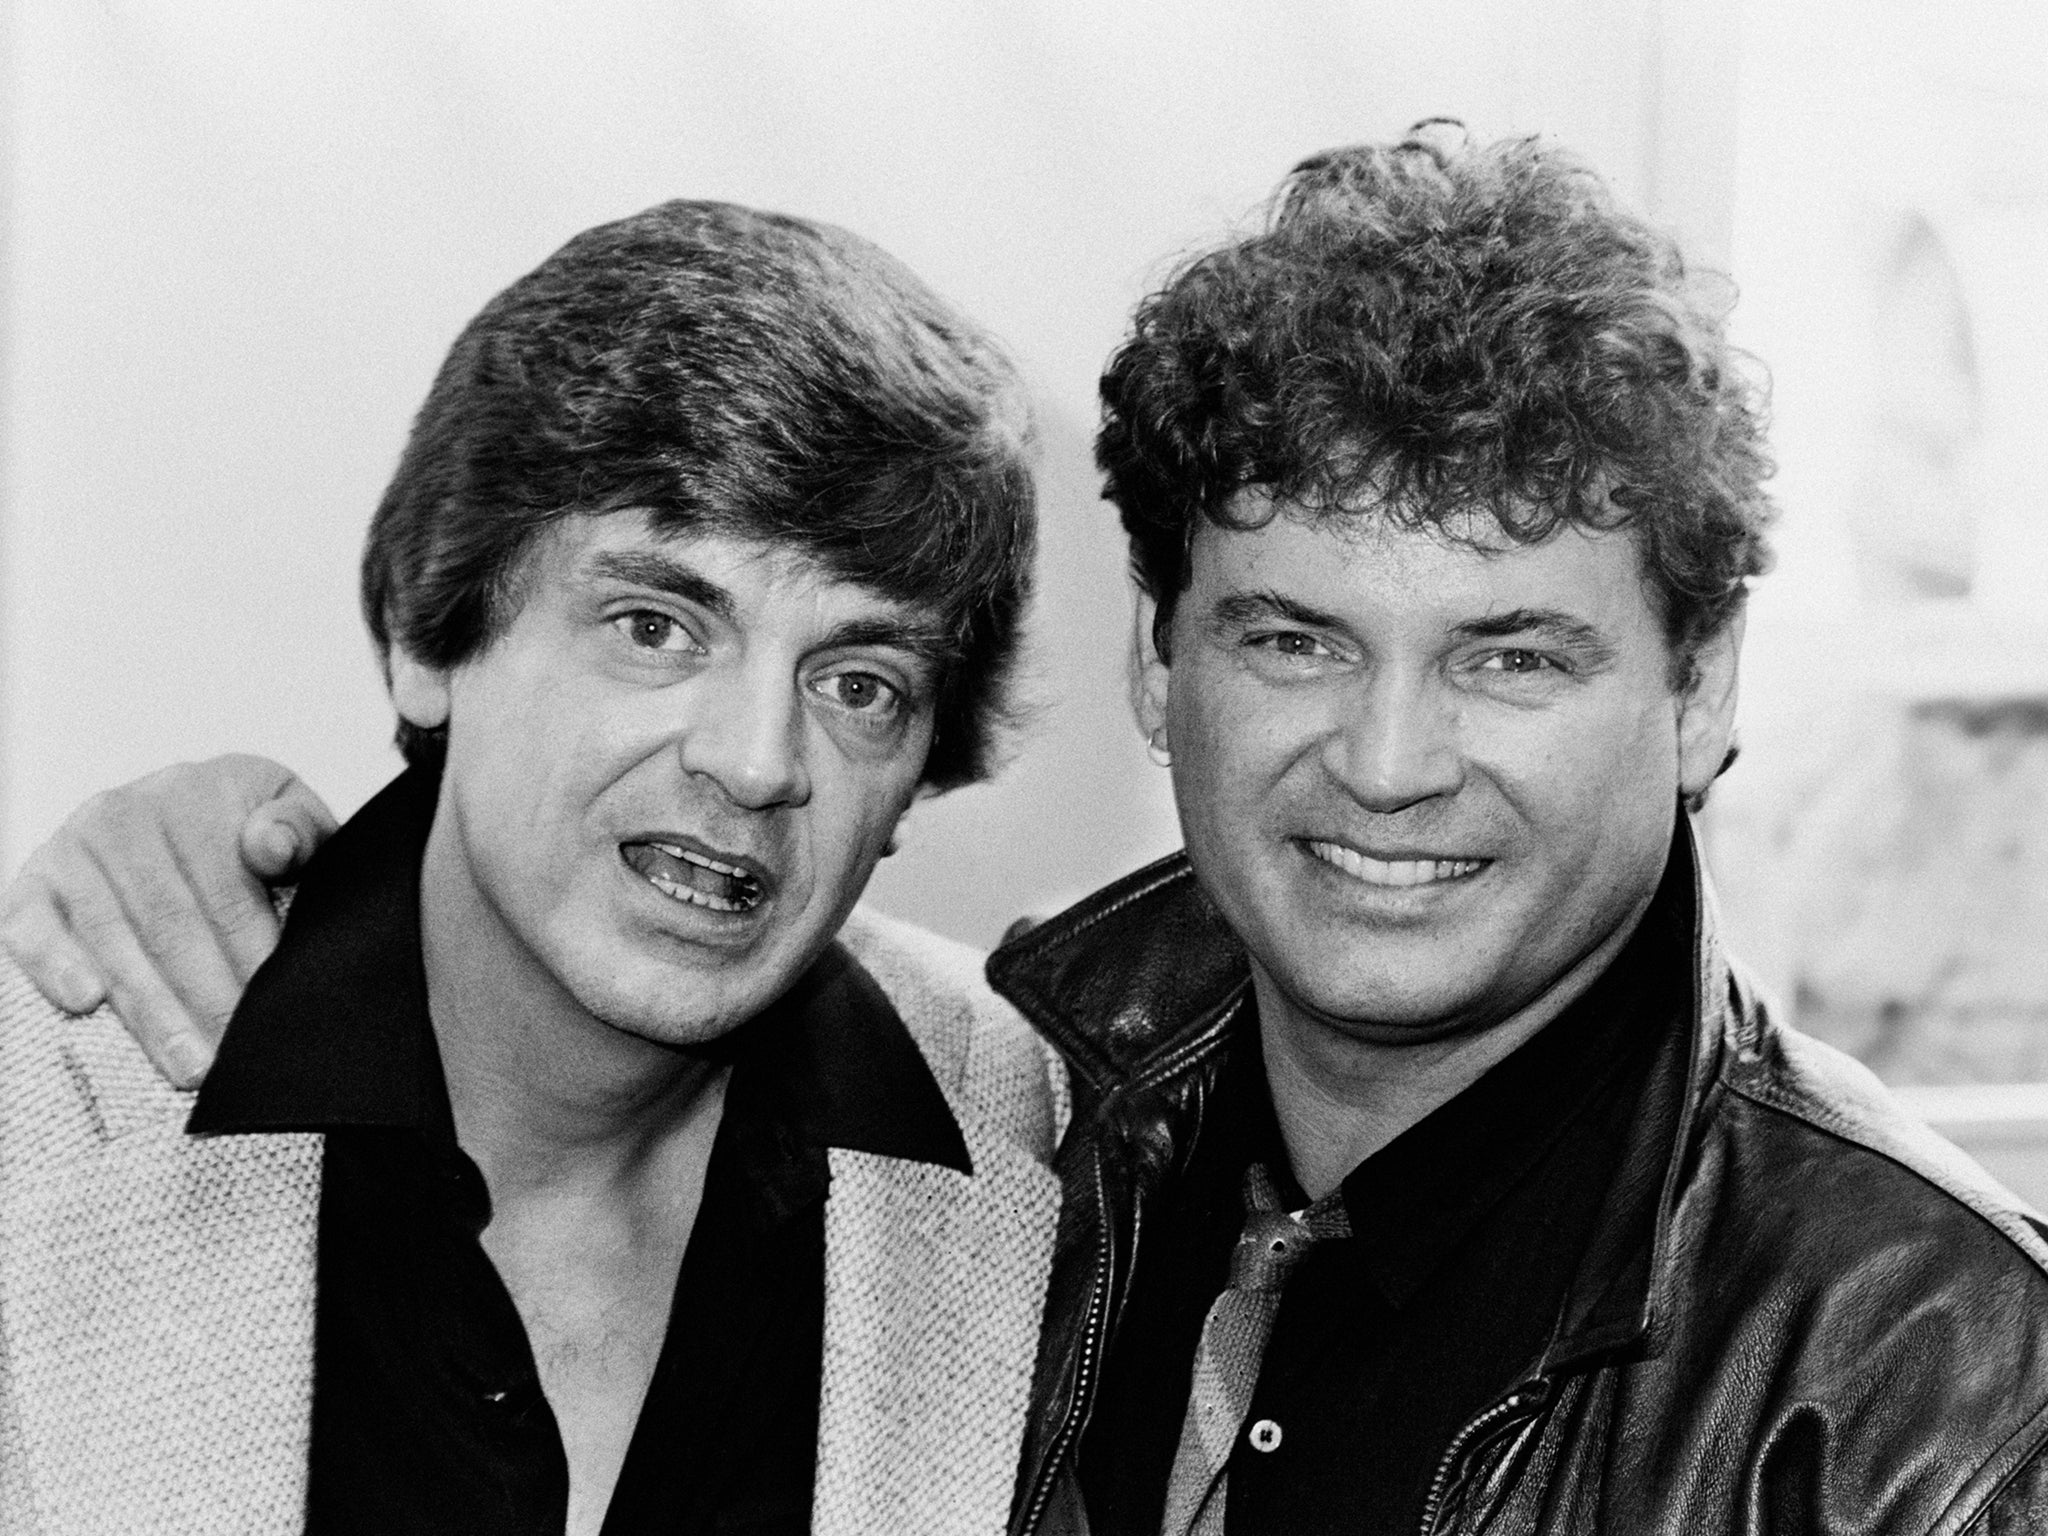 Don (right) with his brother in 1983